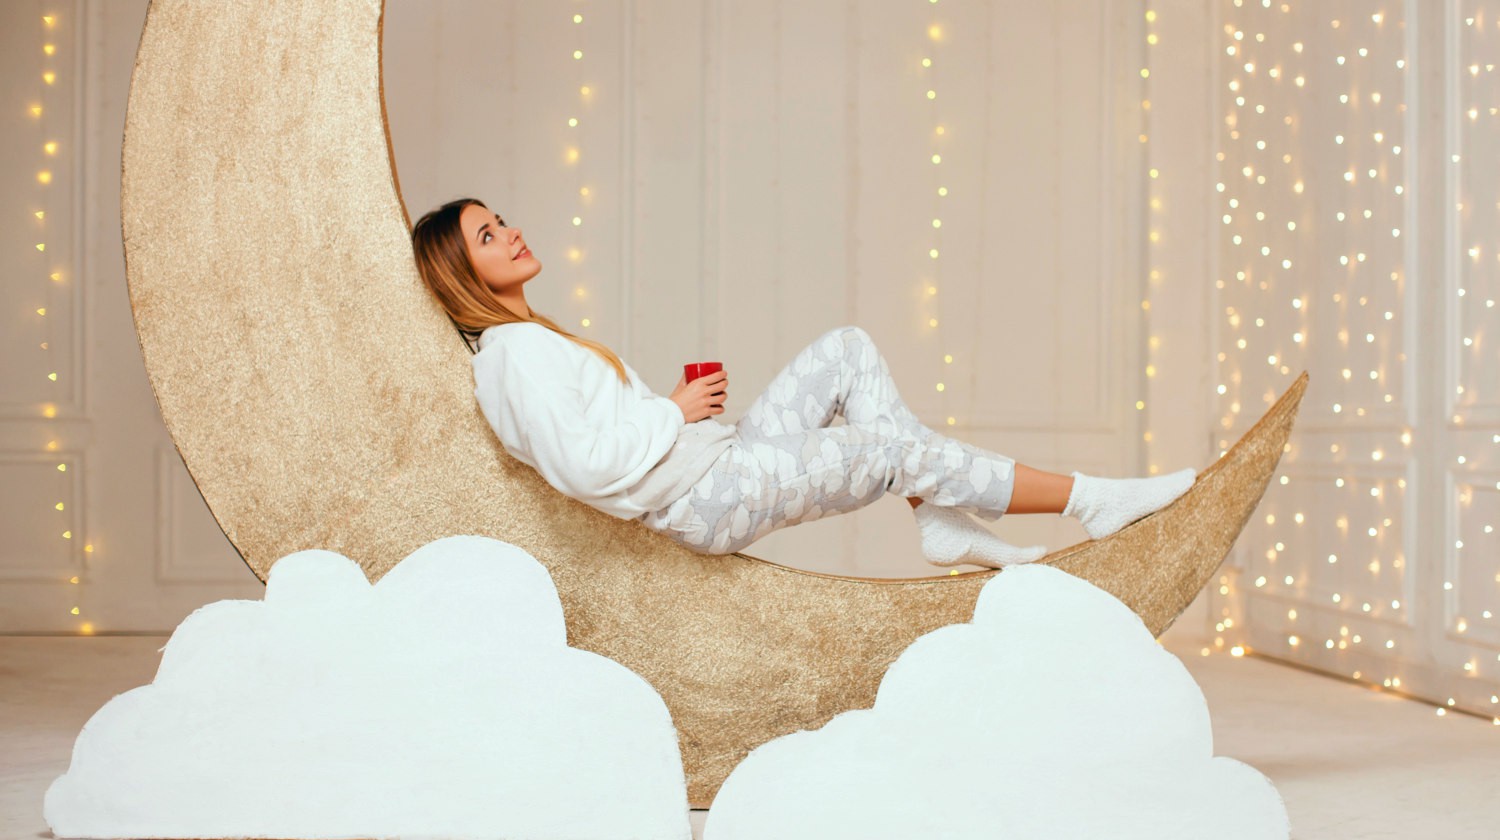 Featured | Girl in Warm light Pajamas lying on a Golden Month with a cup of Milk with Honey, Relax Before Going to Bed | Reasons To Wear Real Pajamas